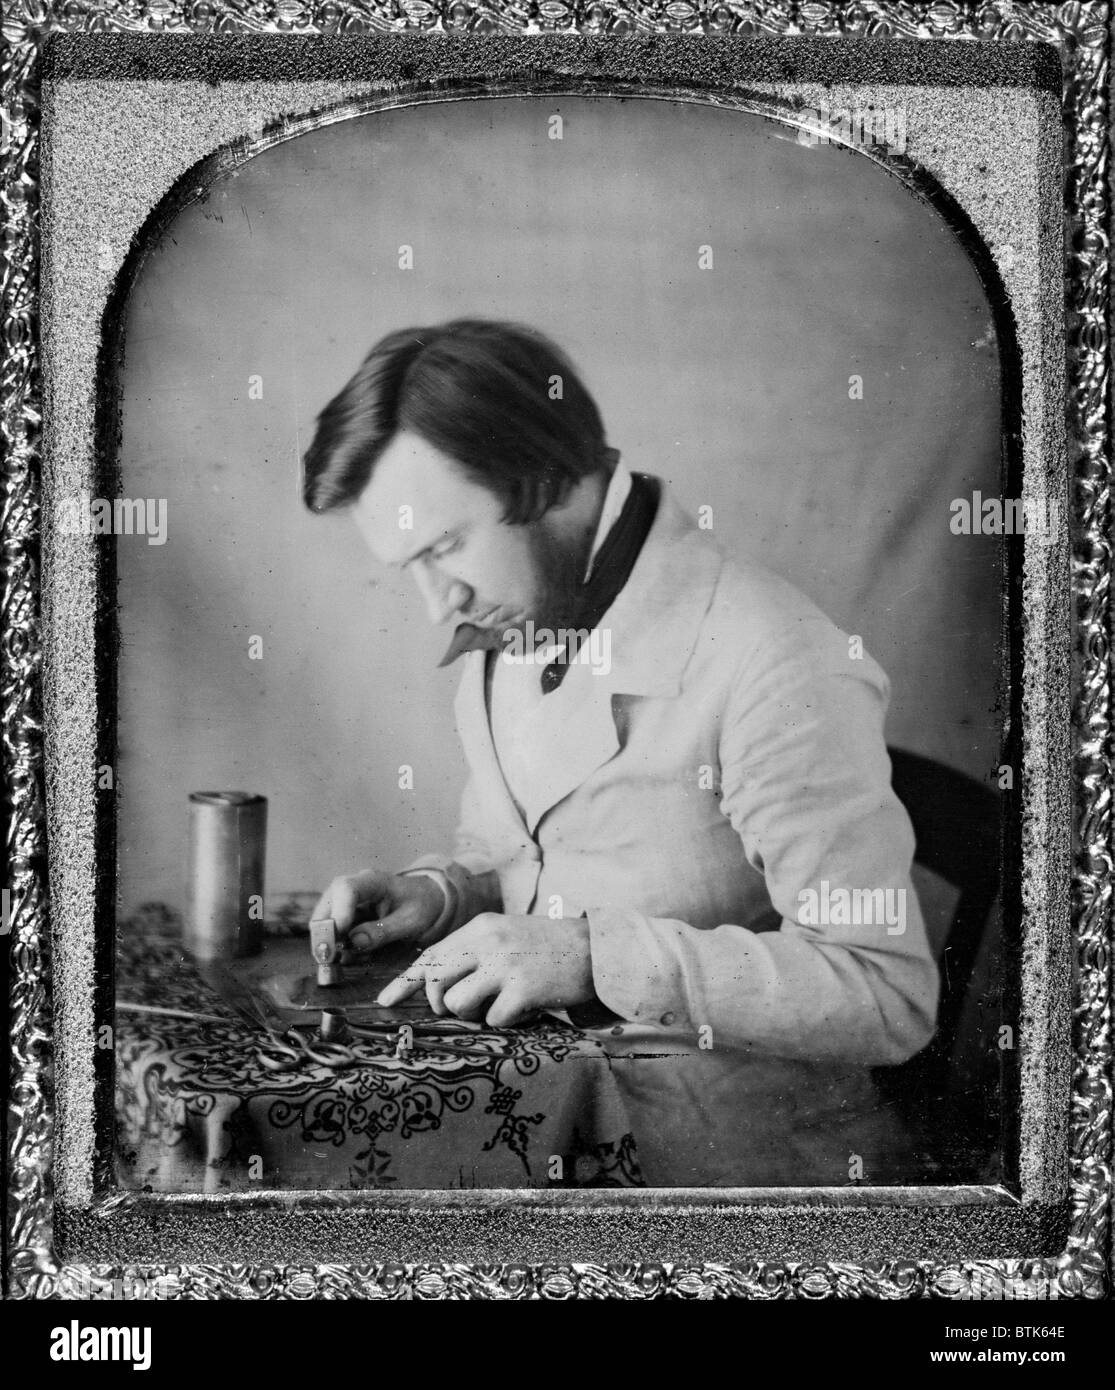 Occupational portrait of a tinworker seated at table with tablecloth, working with a mallet, snips, compass, and metal cylinder. sixth plate daguerreotype ca 1950s Stock Photo